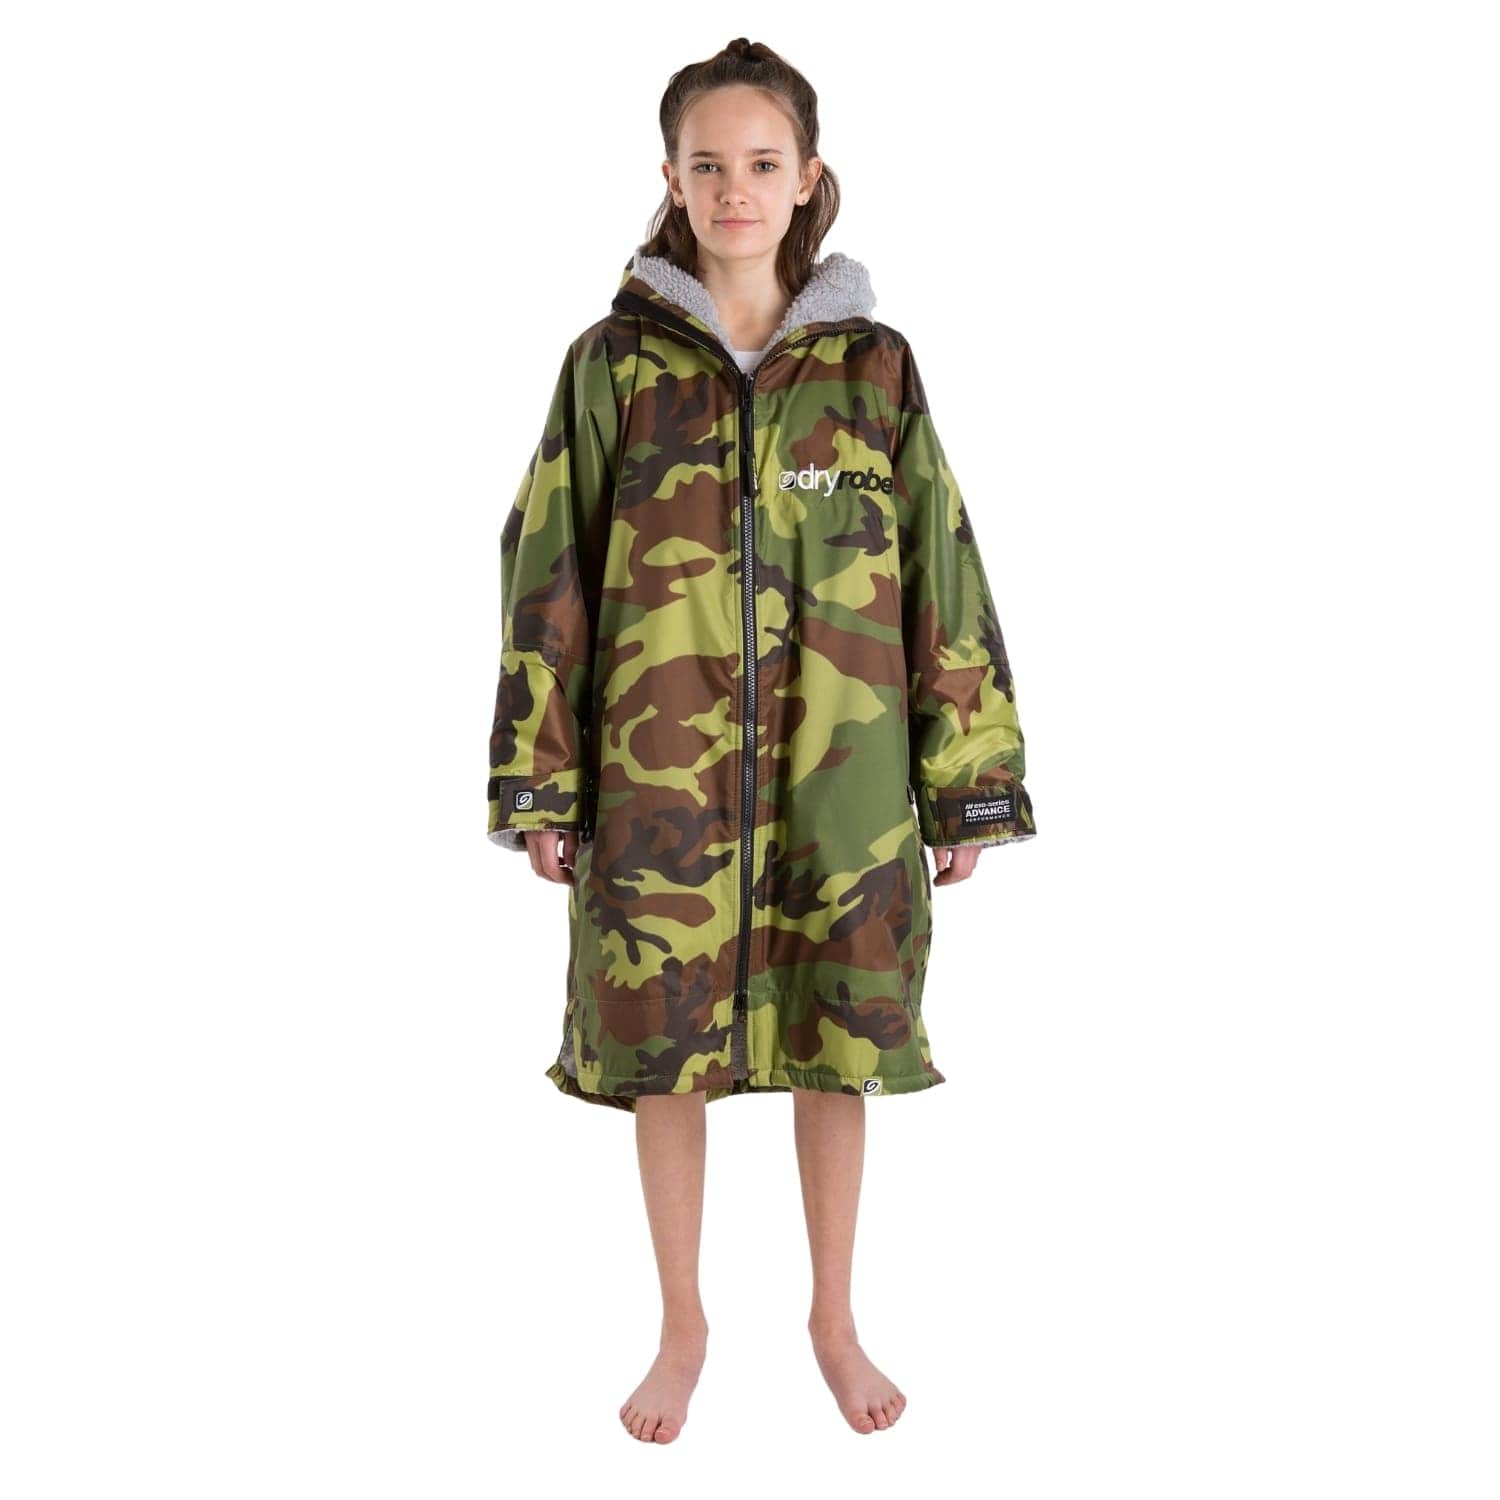 Dryrobe Kids Advance Long Sleeve Drying & Changing Robe - Camouflage/Grey - Changing Robe Poncho Towel by Dryrobe 10-14 Years